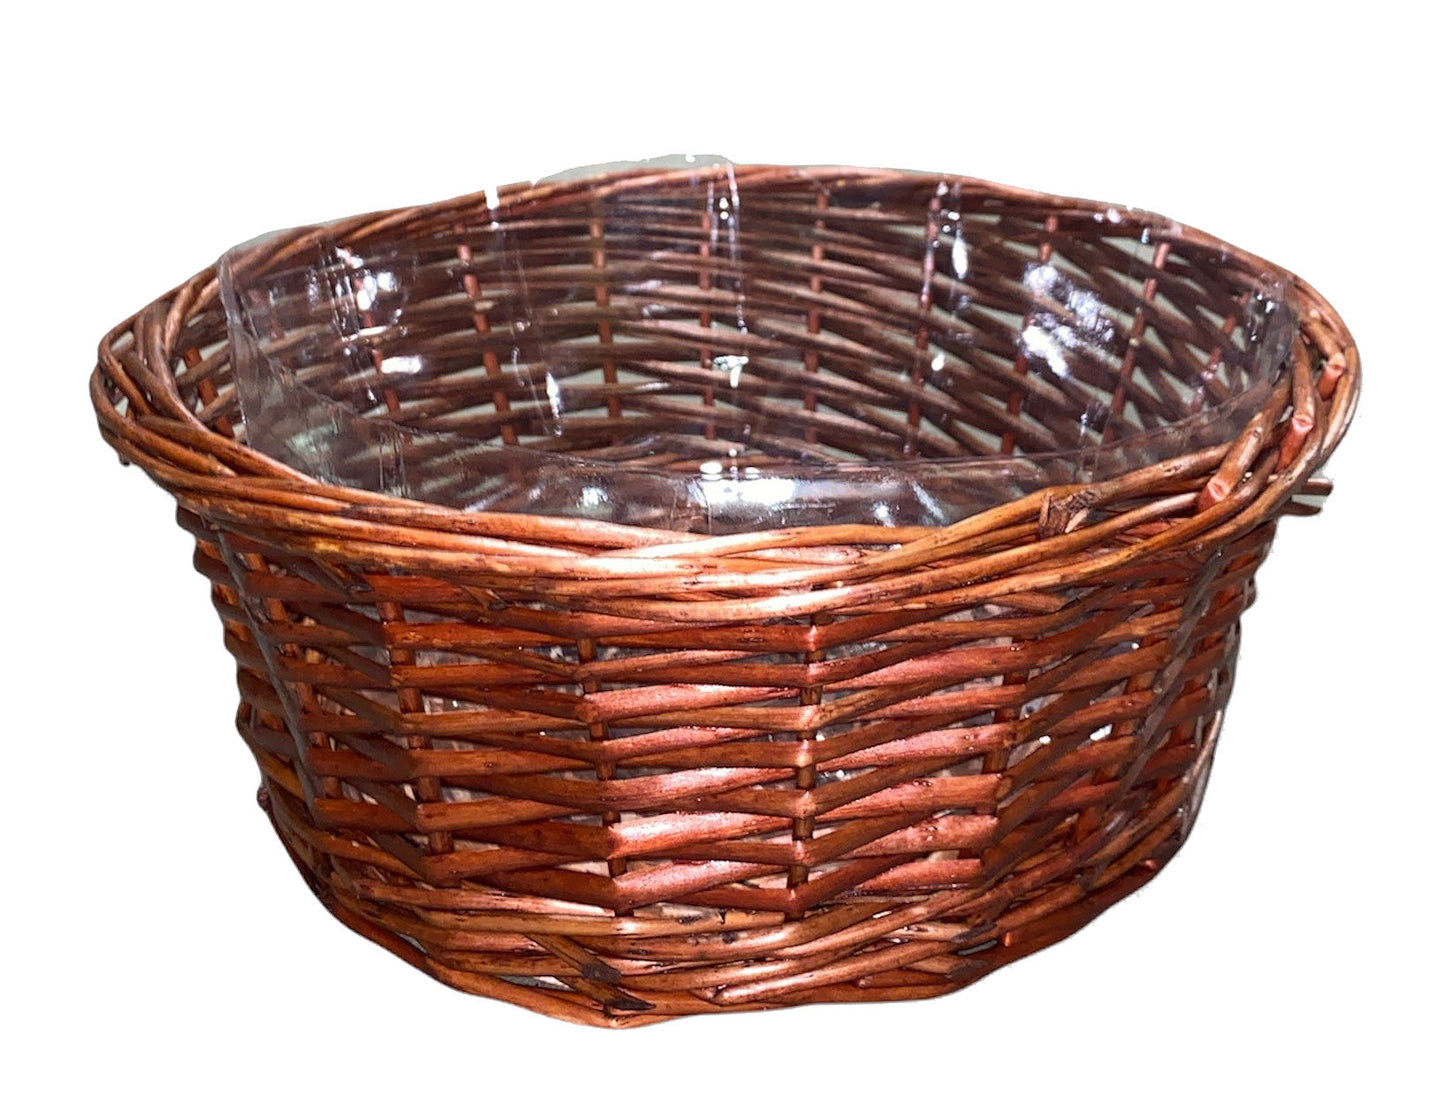 Round Split WILLOW TRAY - 12.36 x 4.78 inch deep - STAINED BROWN - with Hard Liner - fits a 20x30 basket bag - NEW222